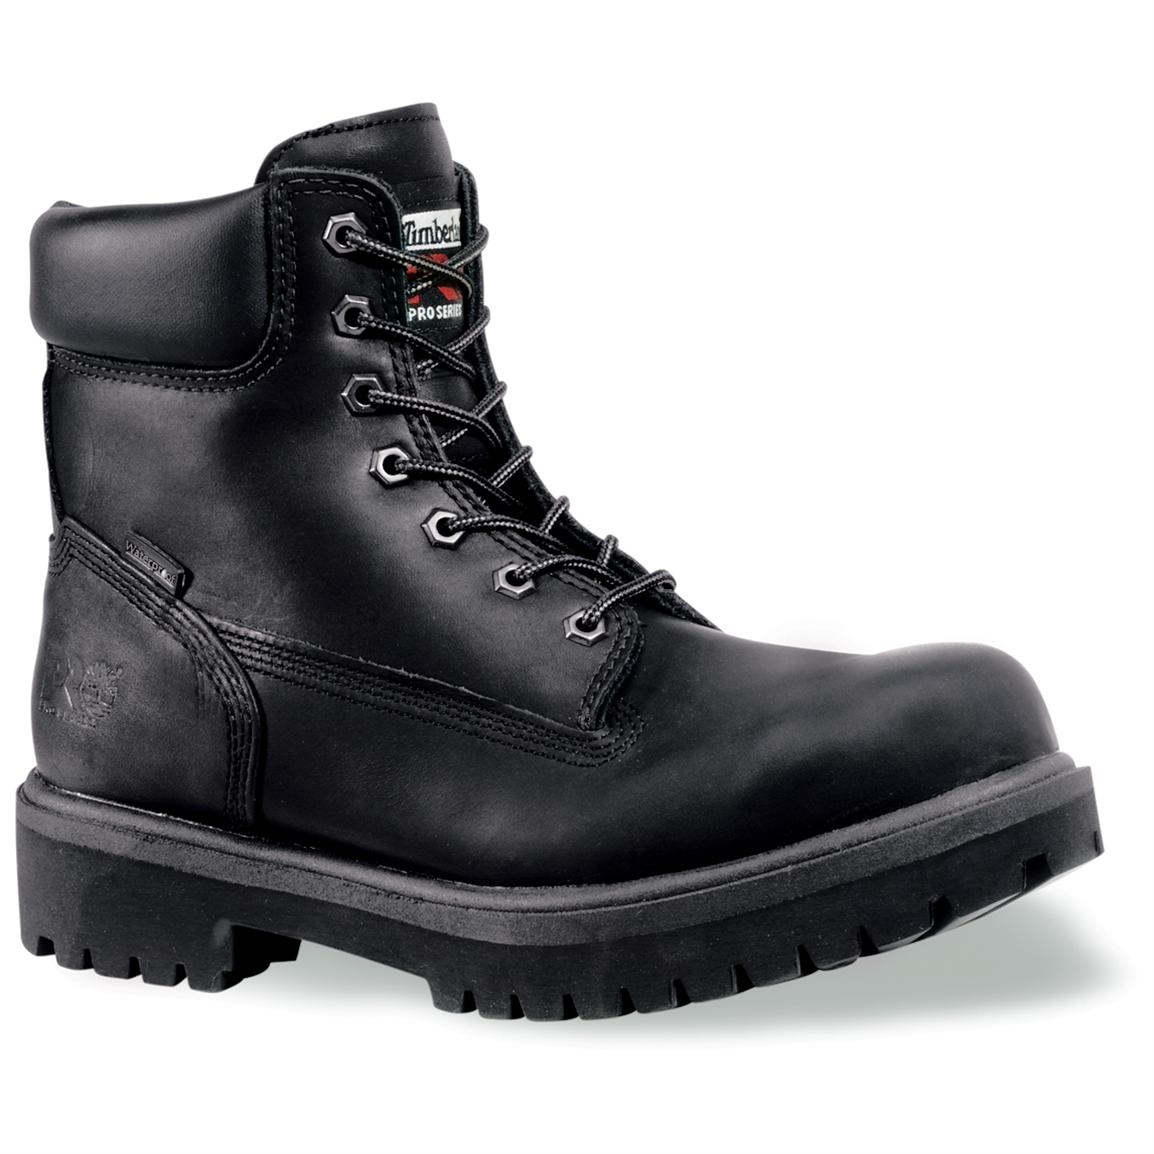 Men's Timberland® Pro® 6" Full-Grain Leather Direct-Attach 200 grams